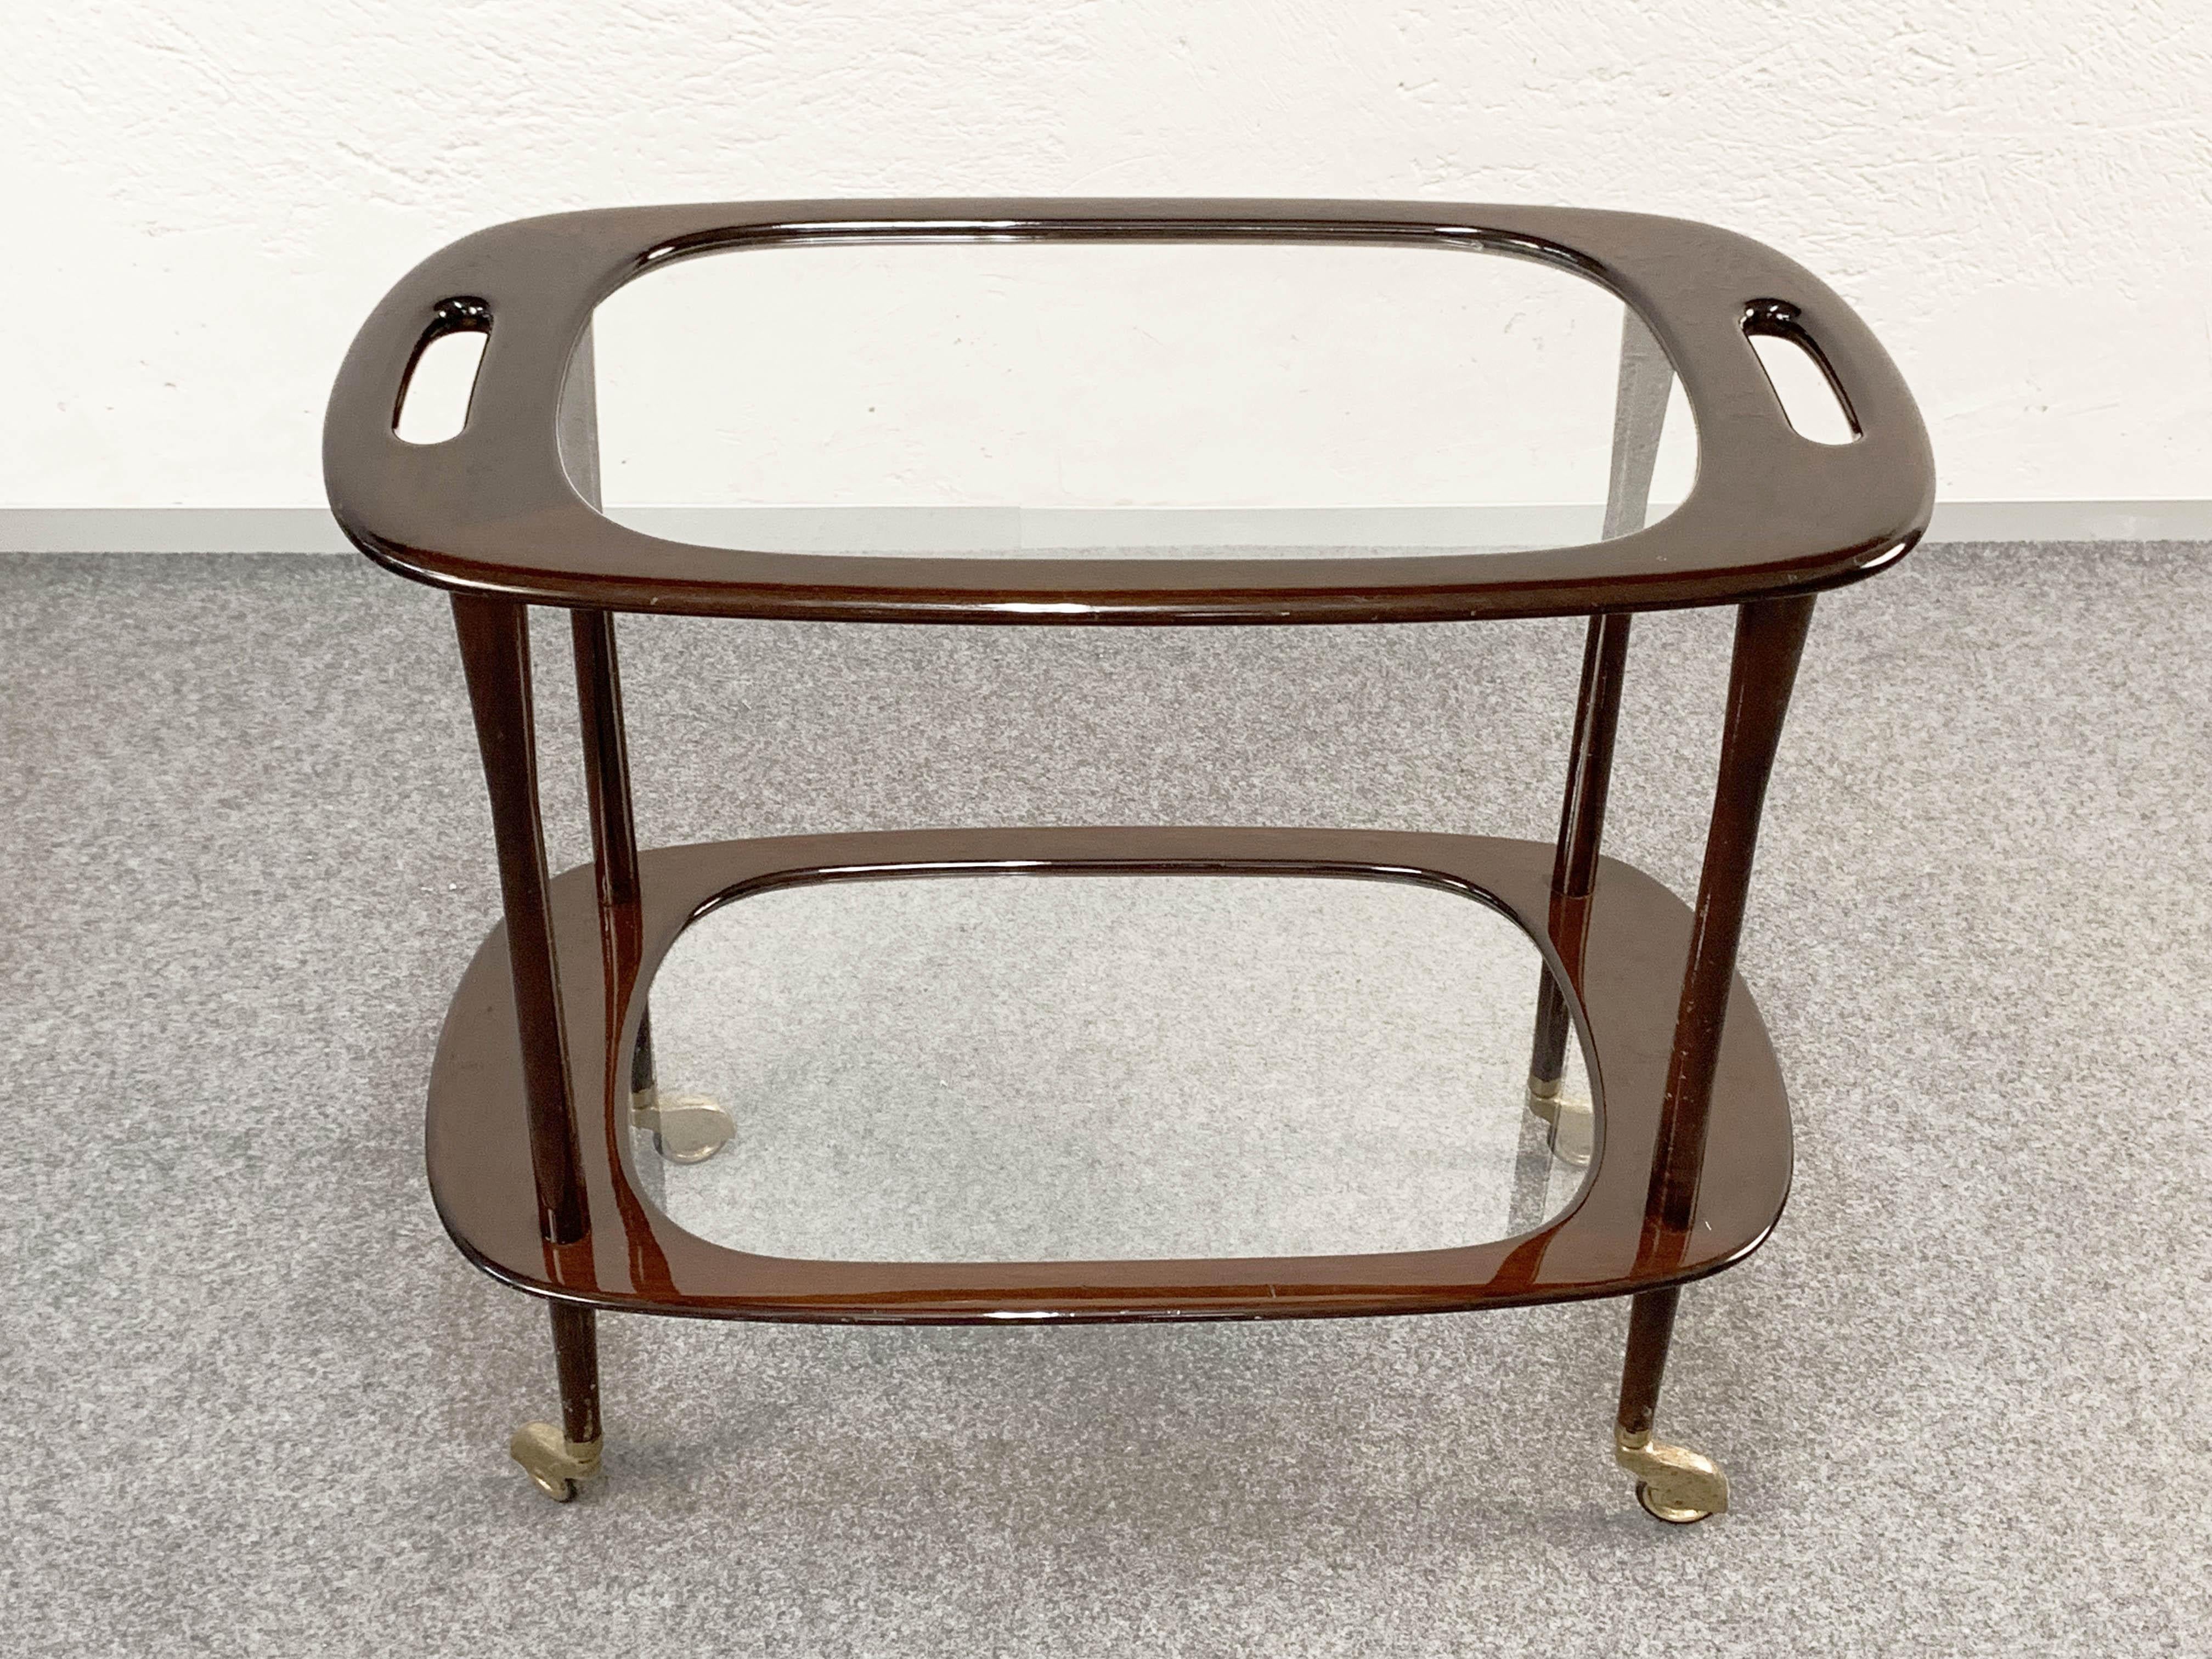 Amazing midcentury mahogany Italian serving bar cart. It was designed by Cesare Lacca for Cassina during the 1950s in Italy.

It is composed of two shelves, made of solid mahogany wood with its original crystal glass. Wheels have brass